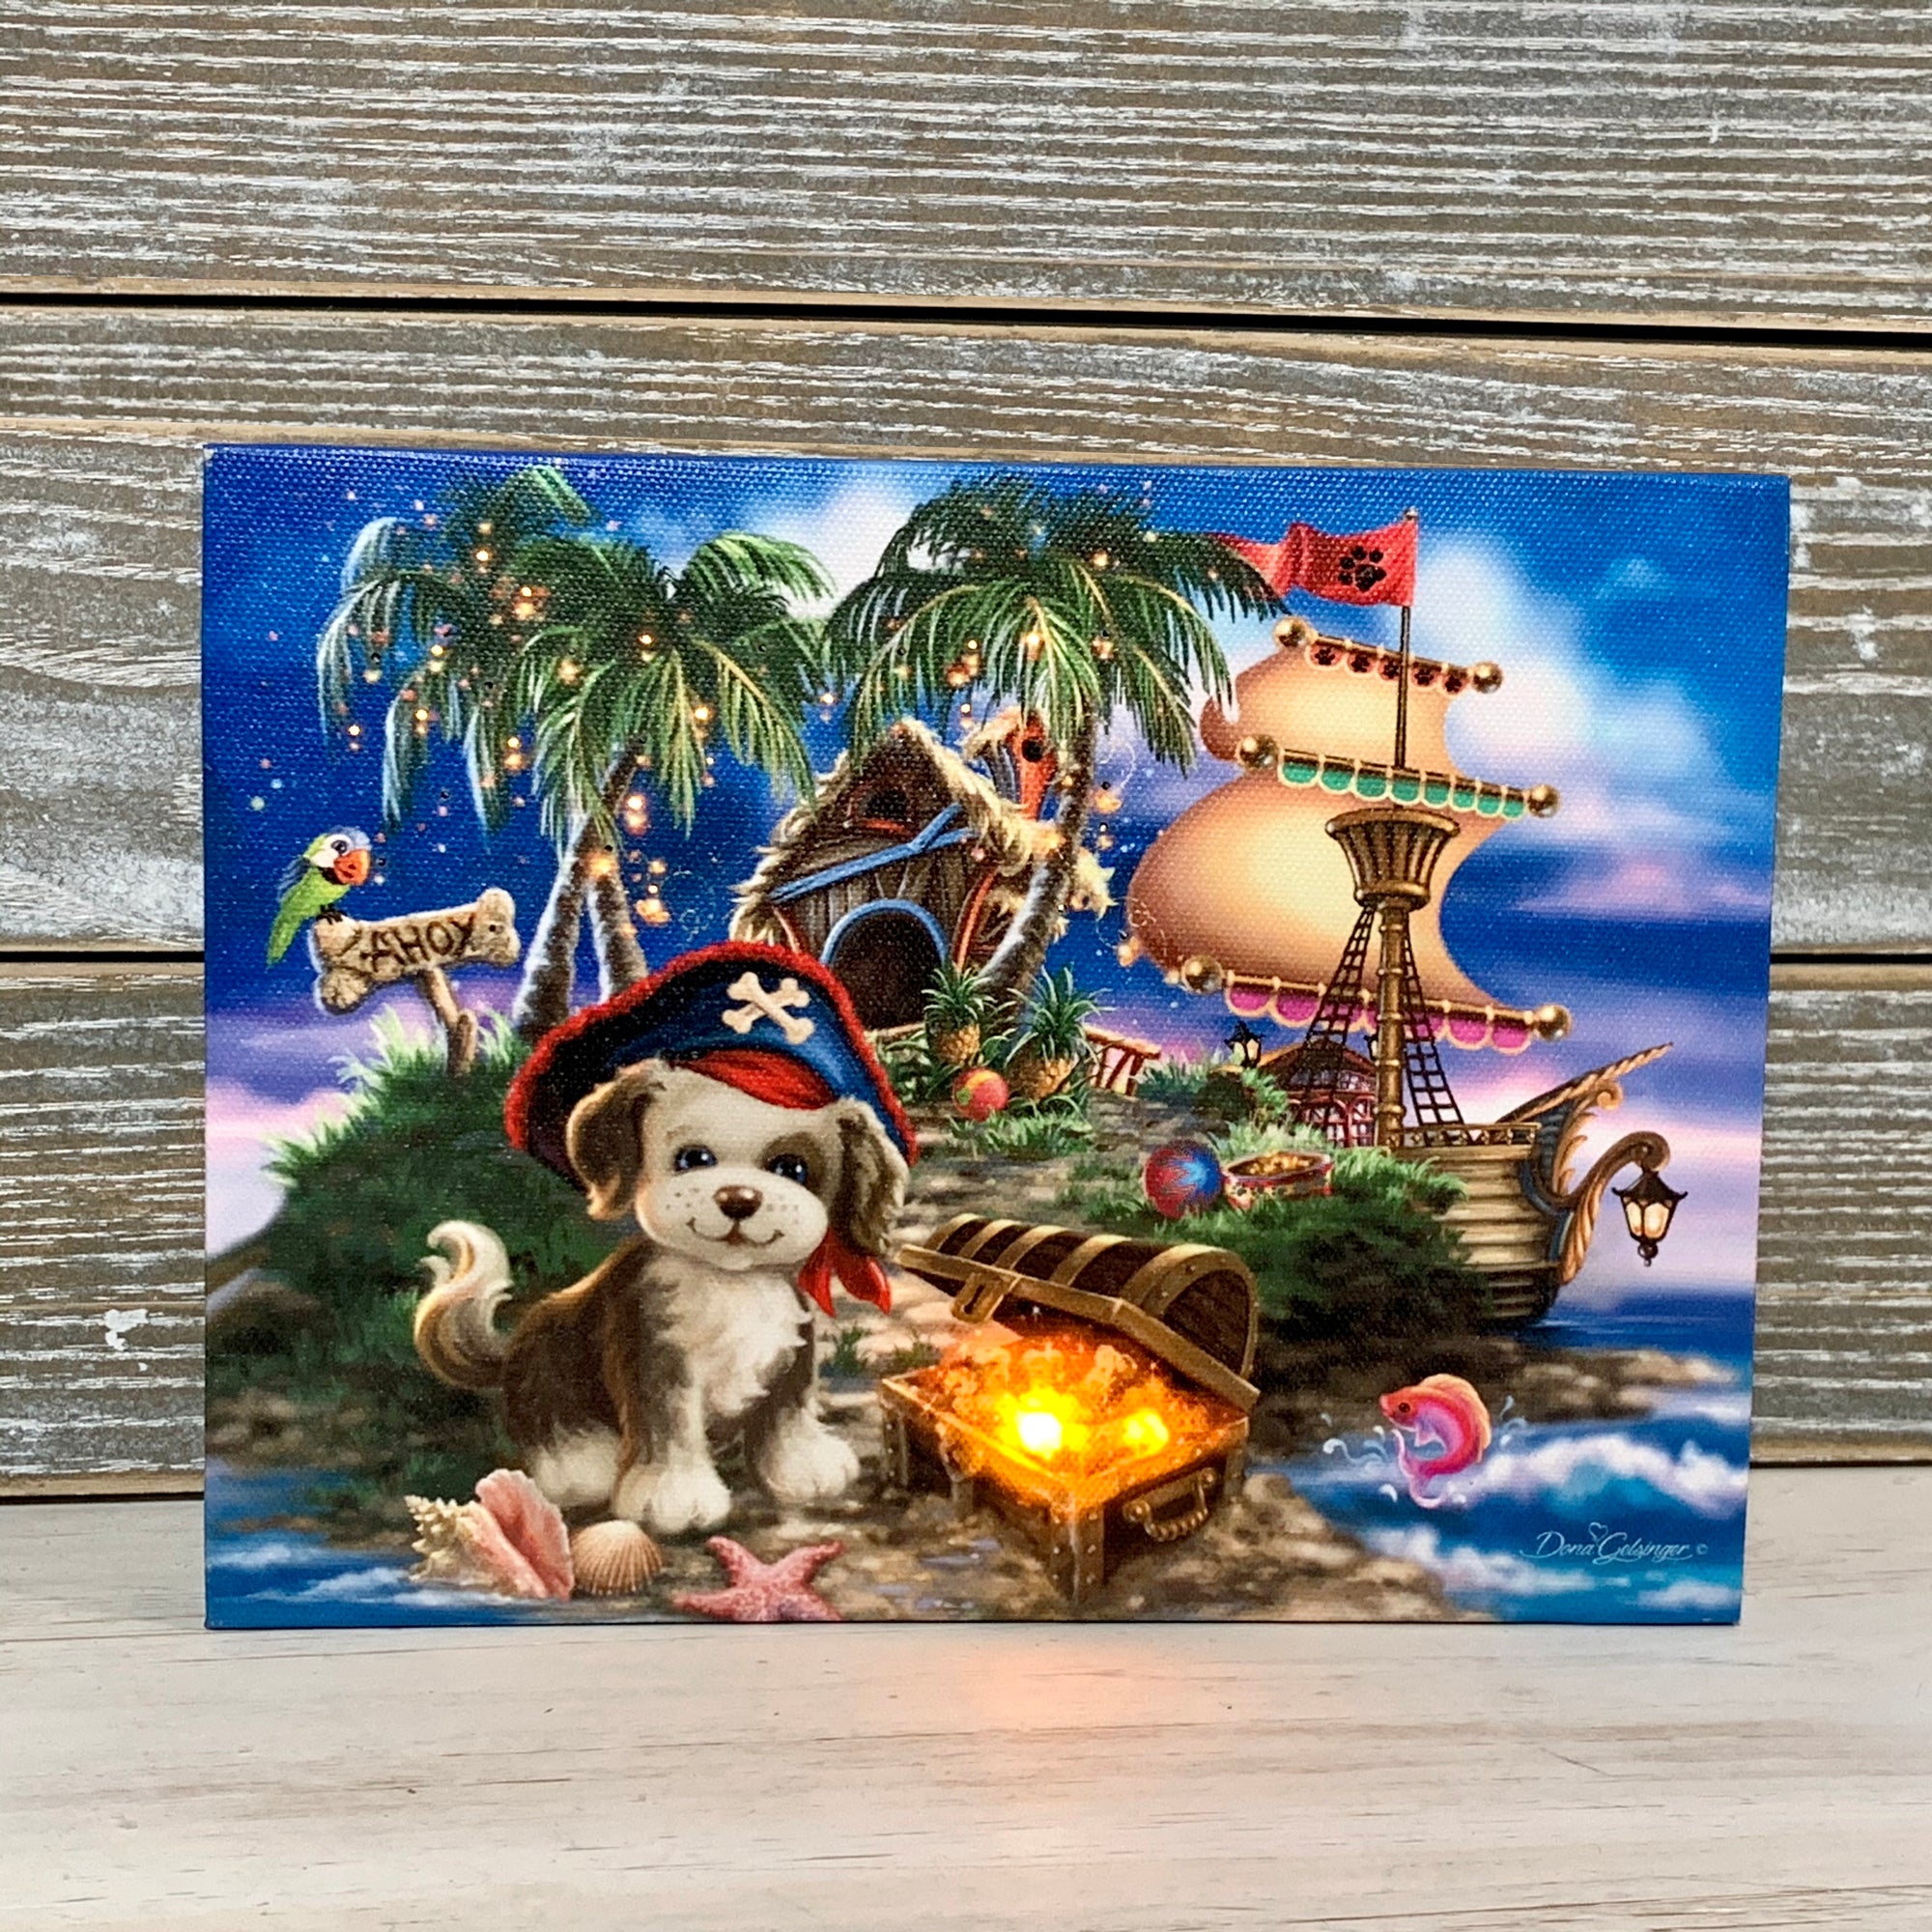  This delightful canvas features a charming puppy wearing a pirate's hat, standing next to a treasure chest overflowing with golden coins. The perfect addition to any room, this canvas will transport you to a tropical island, complete with palm trees, a cozy hut, and a trusty pirate ship in the background.